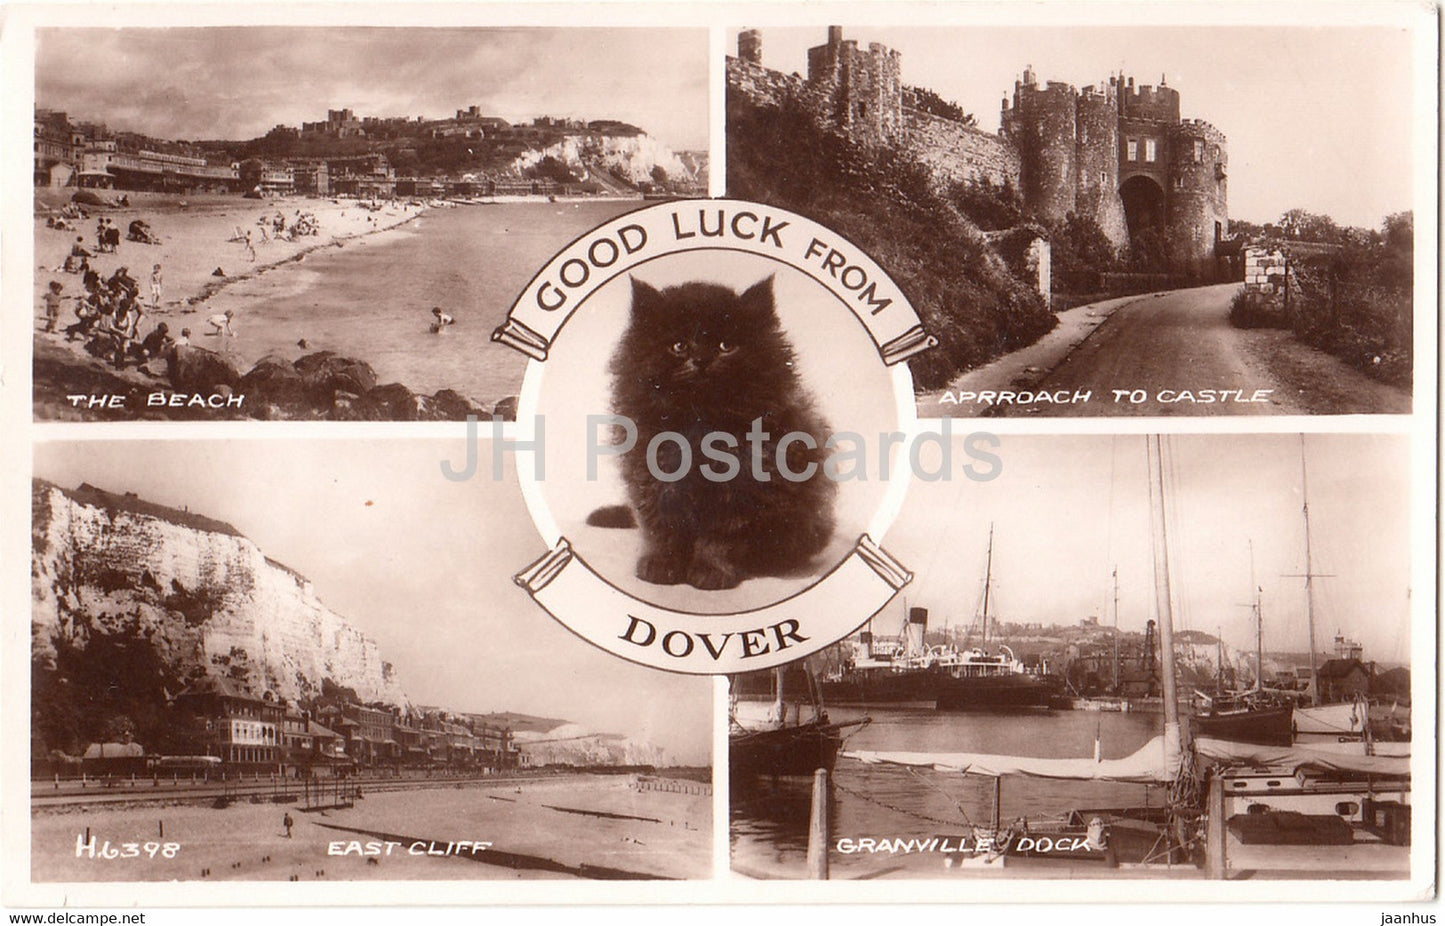 Good Luck from Dover - beach - East Cliff - castle - Granville Dock - cat - United Kingdom - 1953 - England - used - JH Postcards